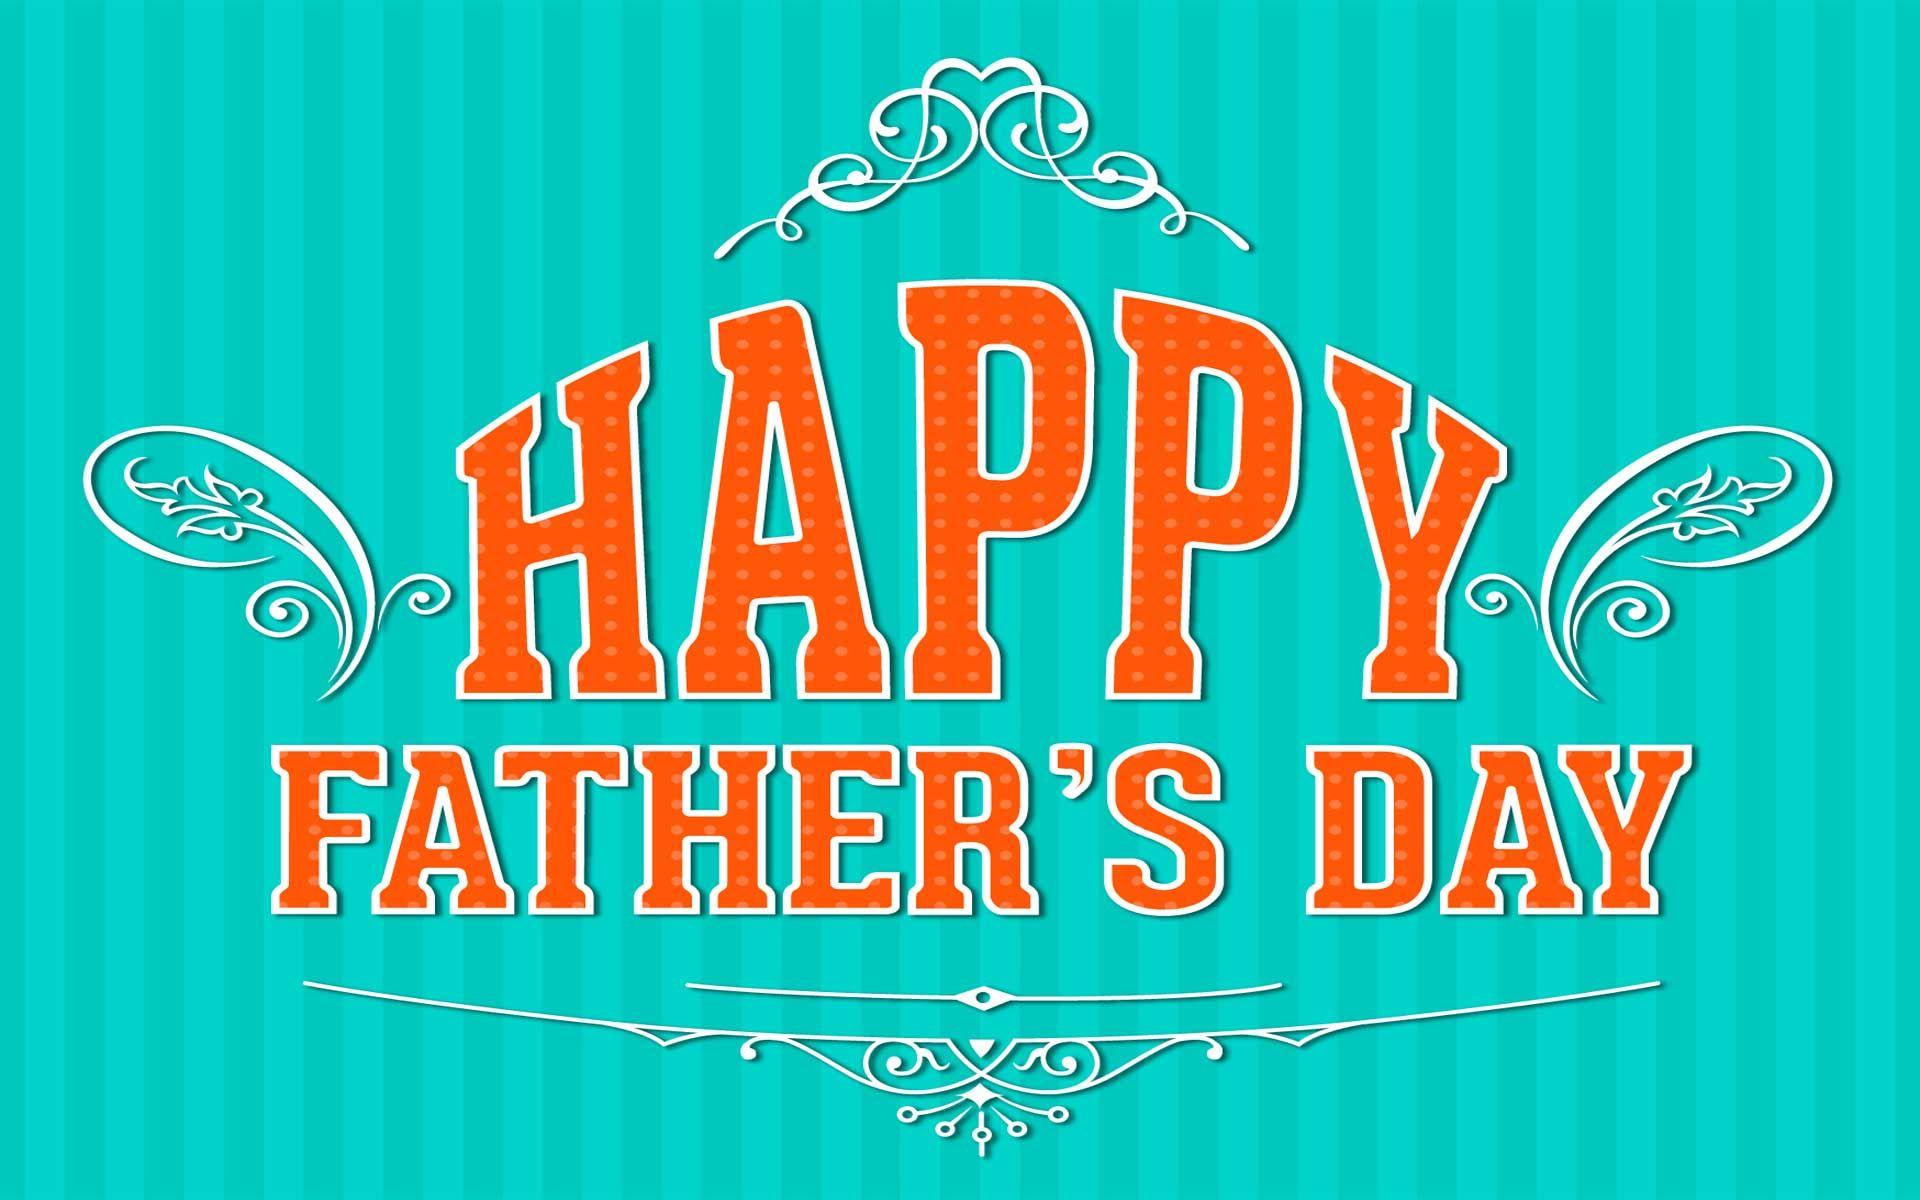 Happy Fathers Day Greetings, Cards Free